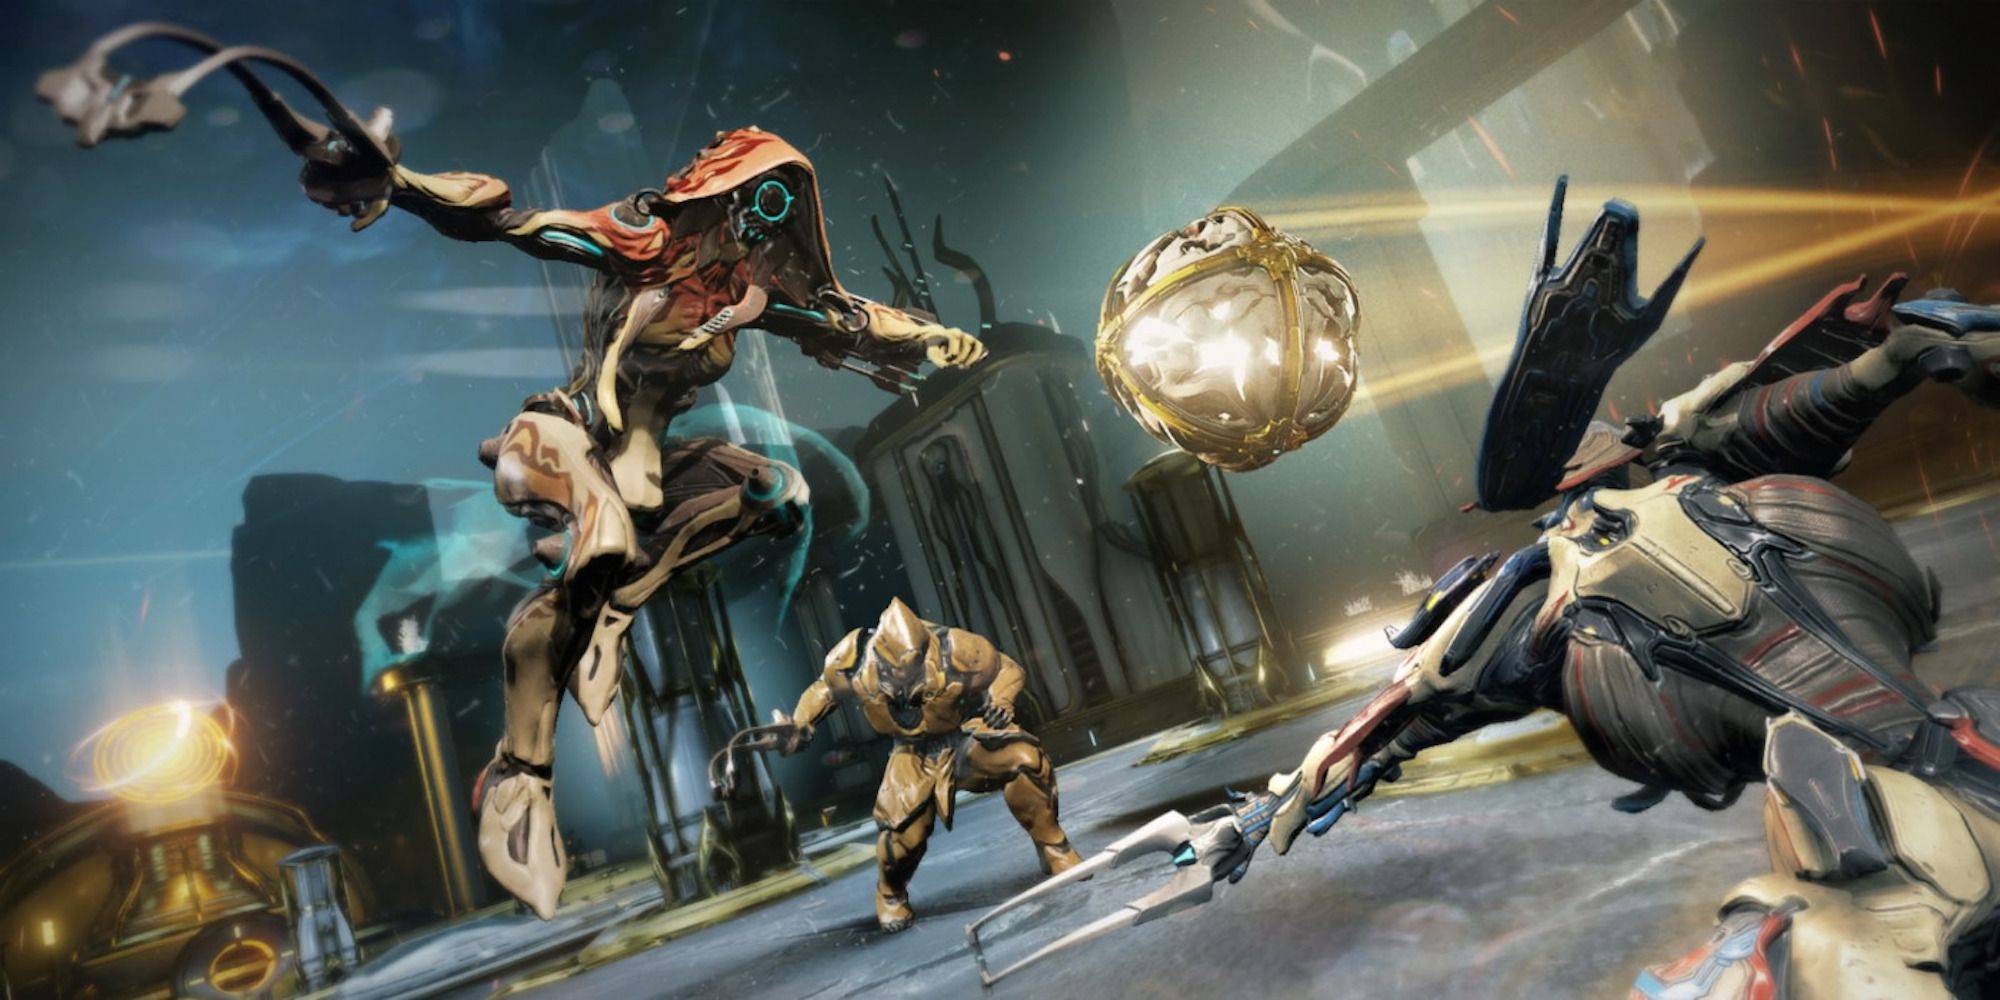 Promo art featuring character from Warframe